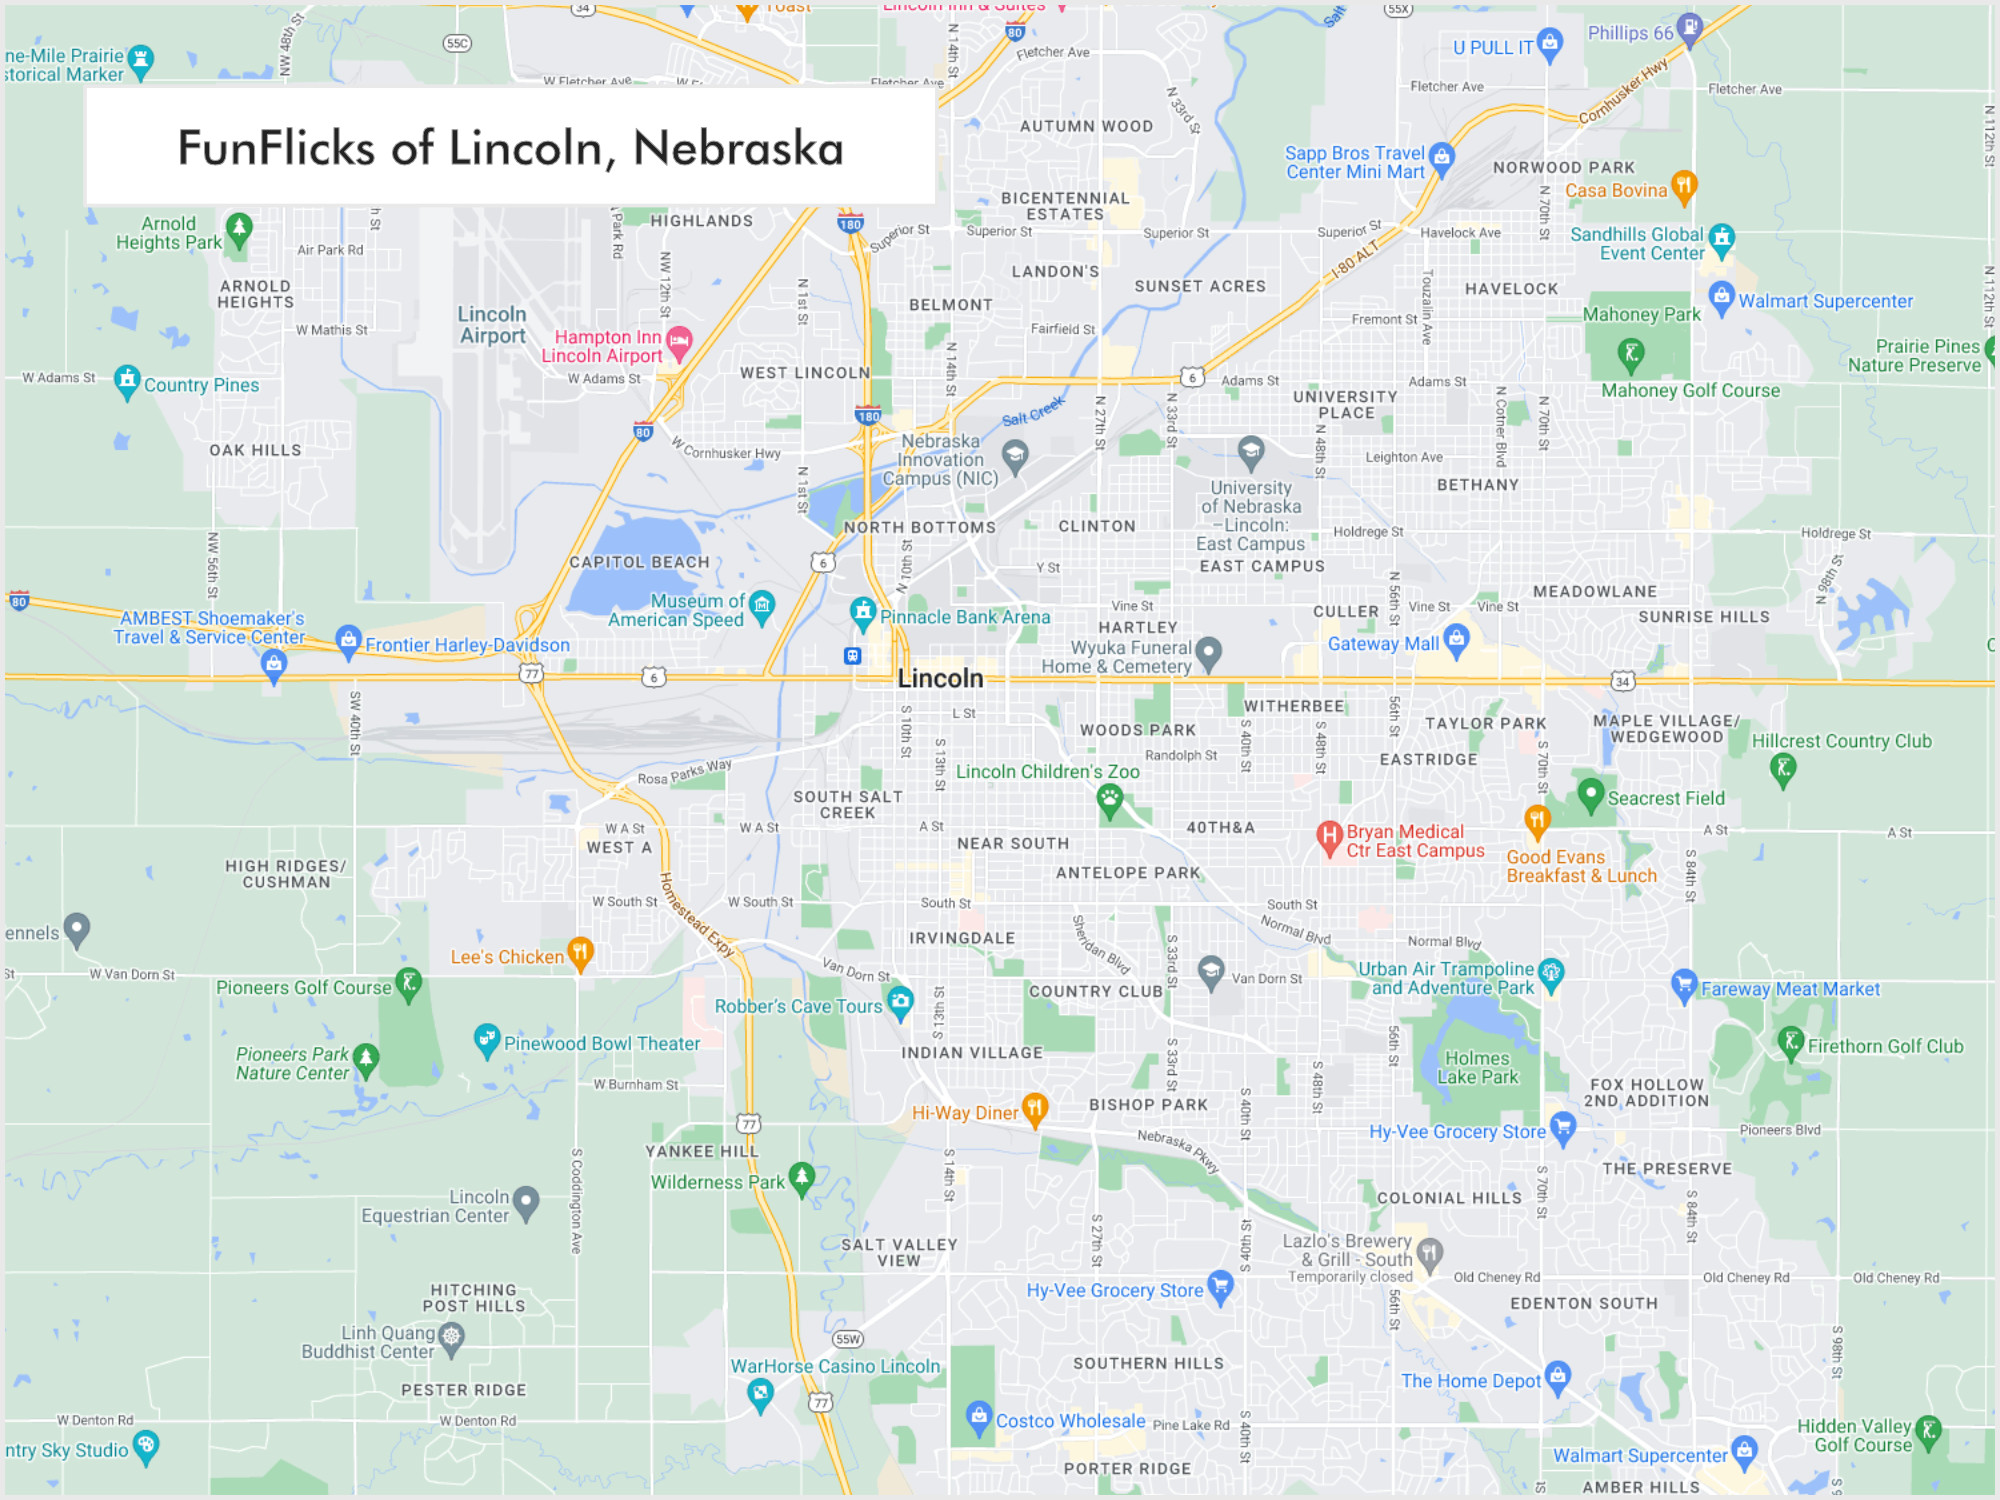 FunFlicks® Lincoln territory map